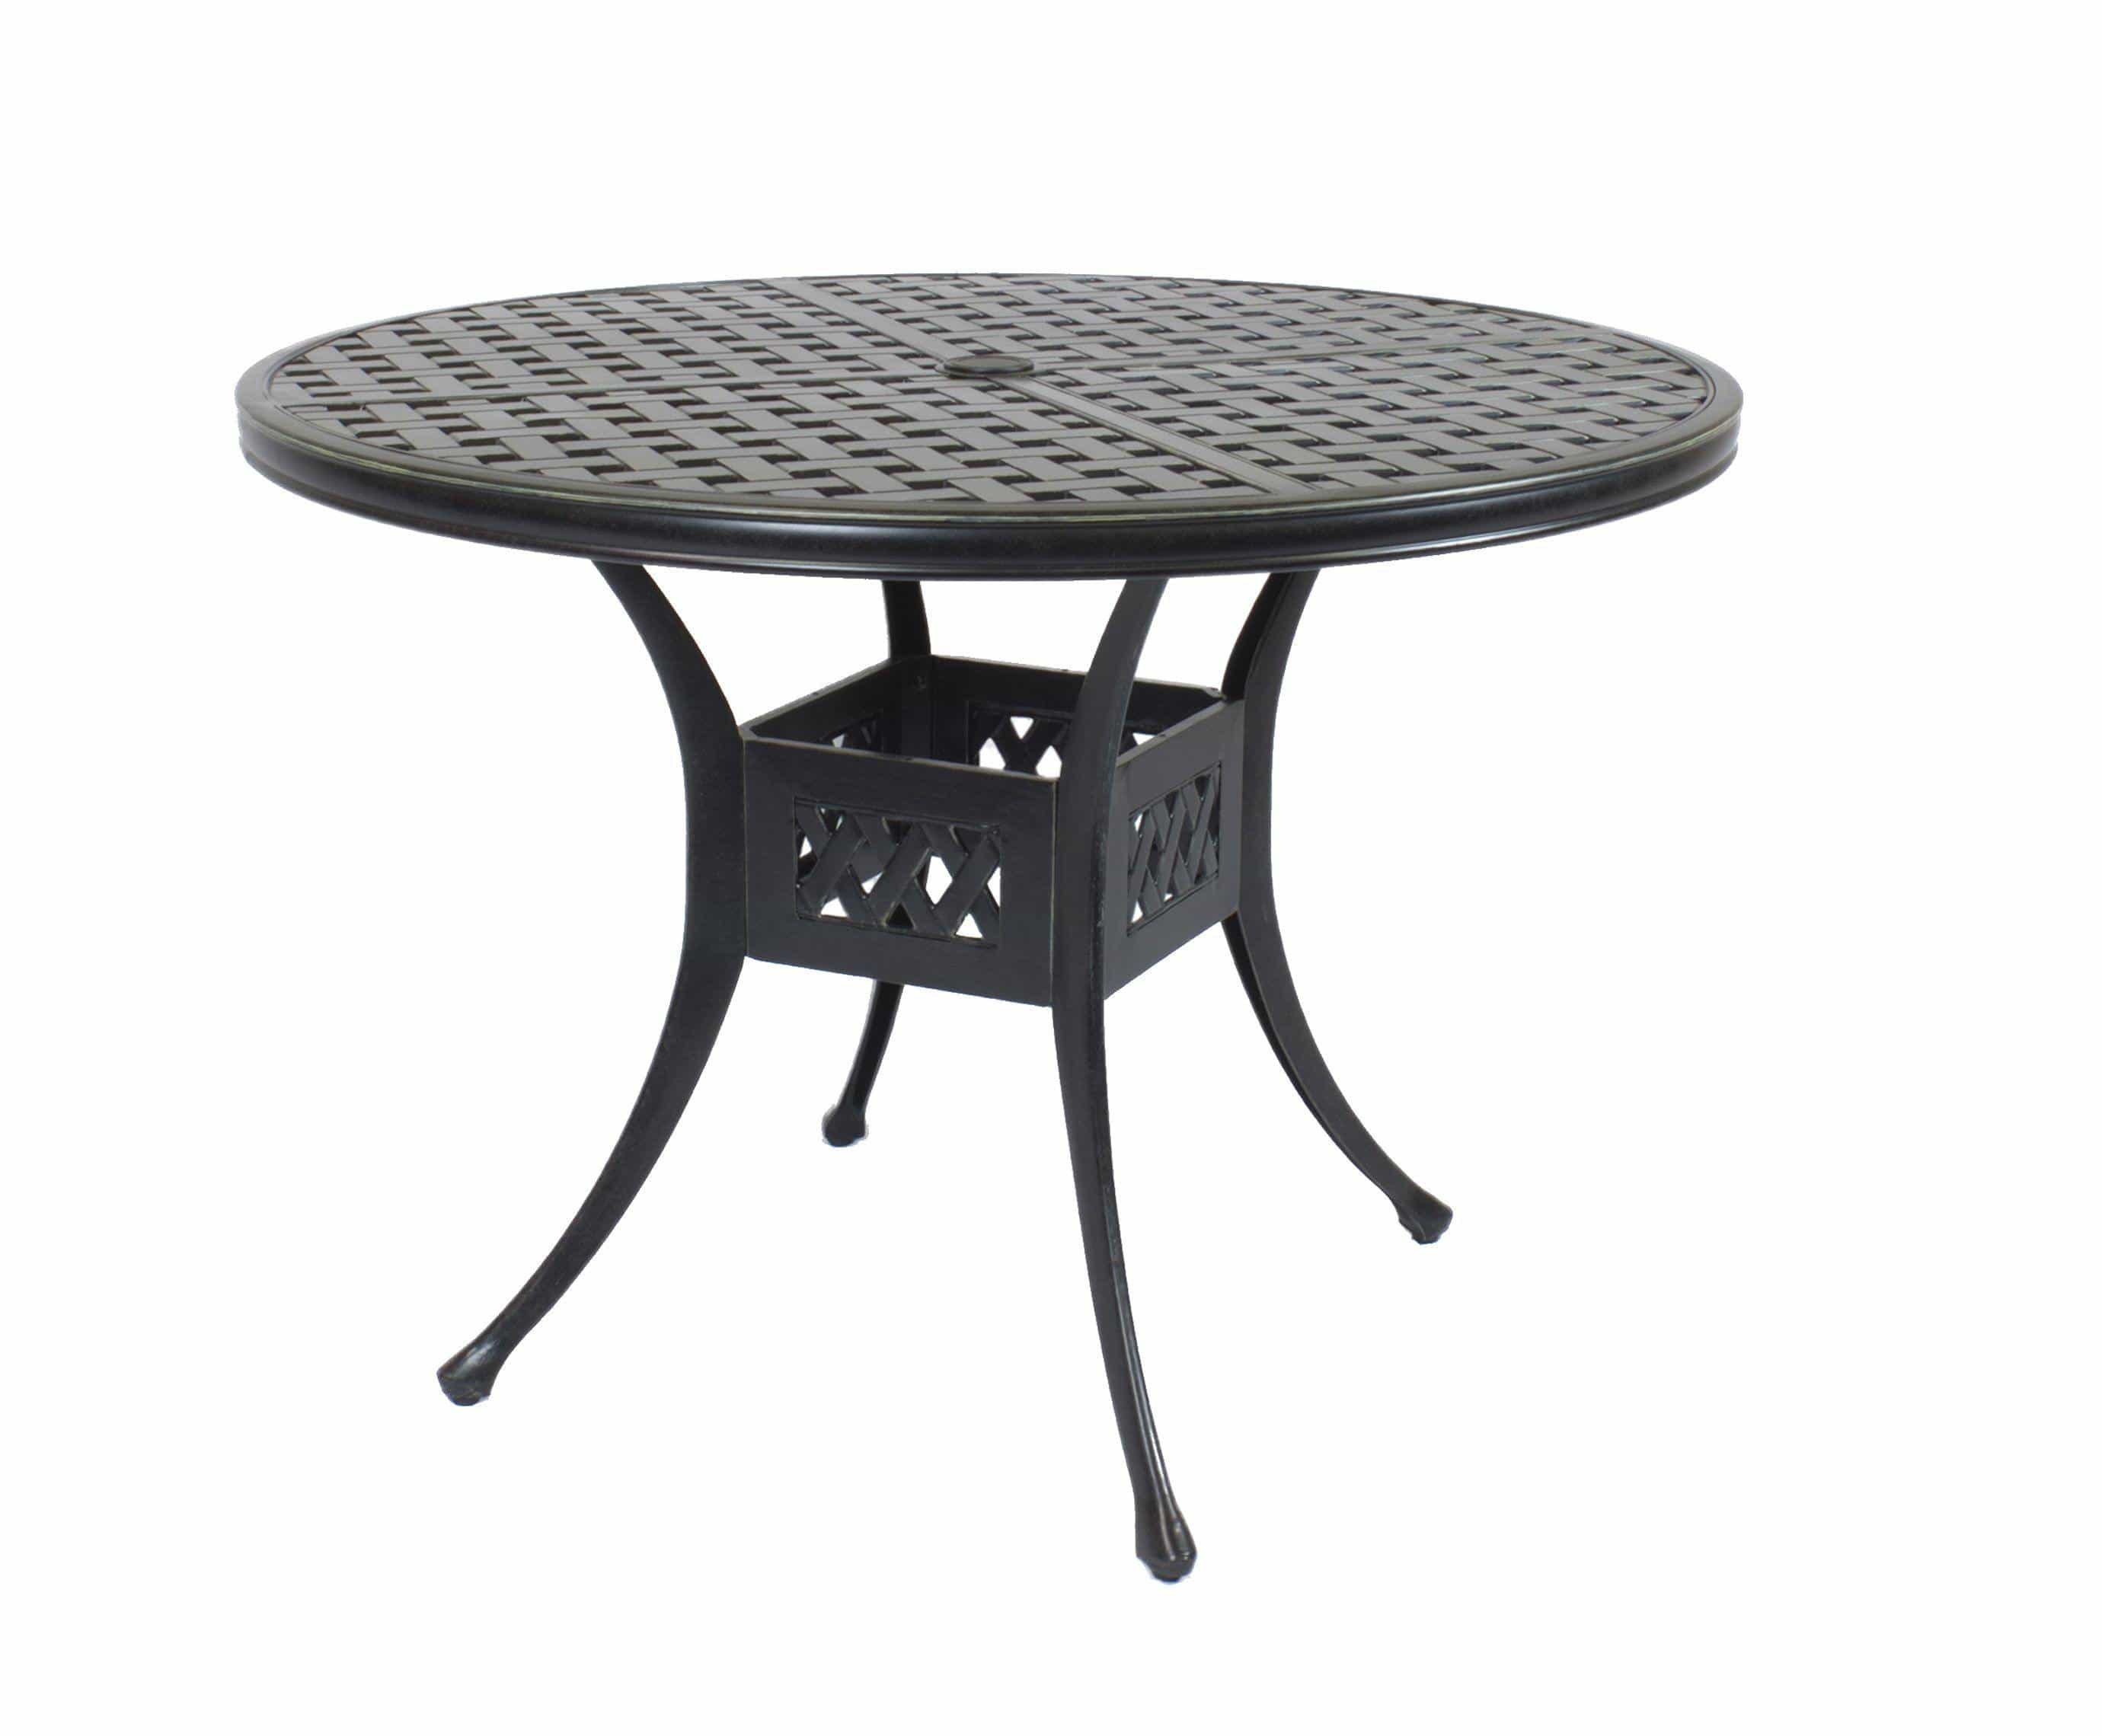 Lawton Casual Comfort Outdoor Dining Set Lawton Casual Comfort - Cast Aluminum 3 PC Dining Set with 42" Round Table and 2 Swivel Rocker Chairs